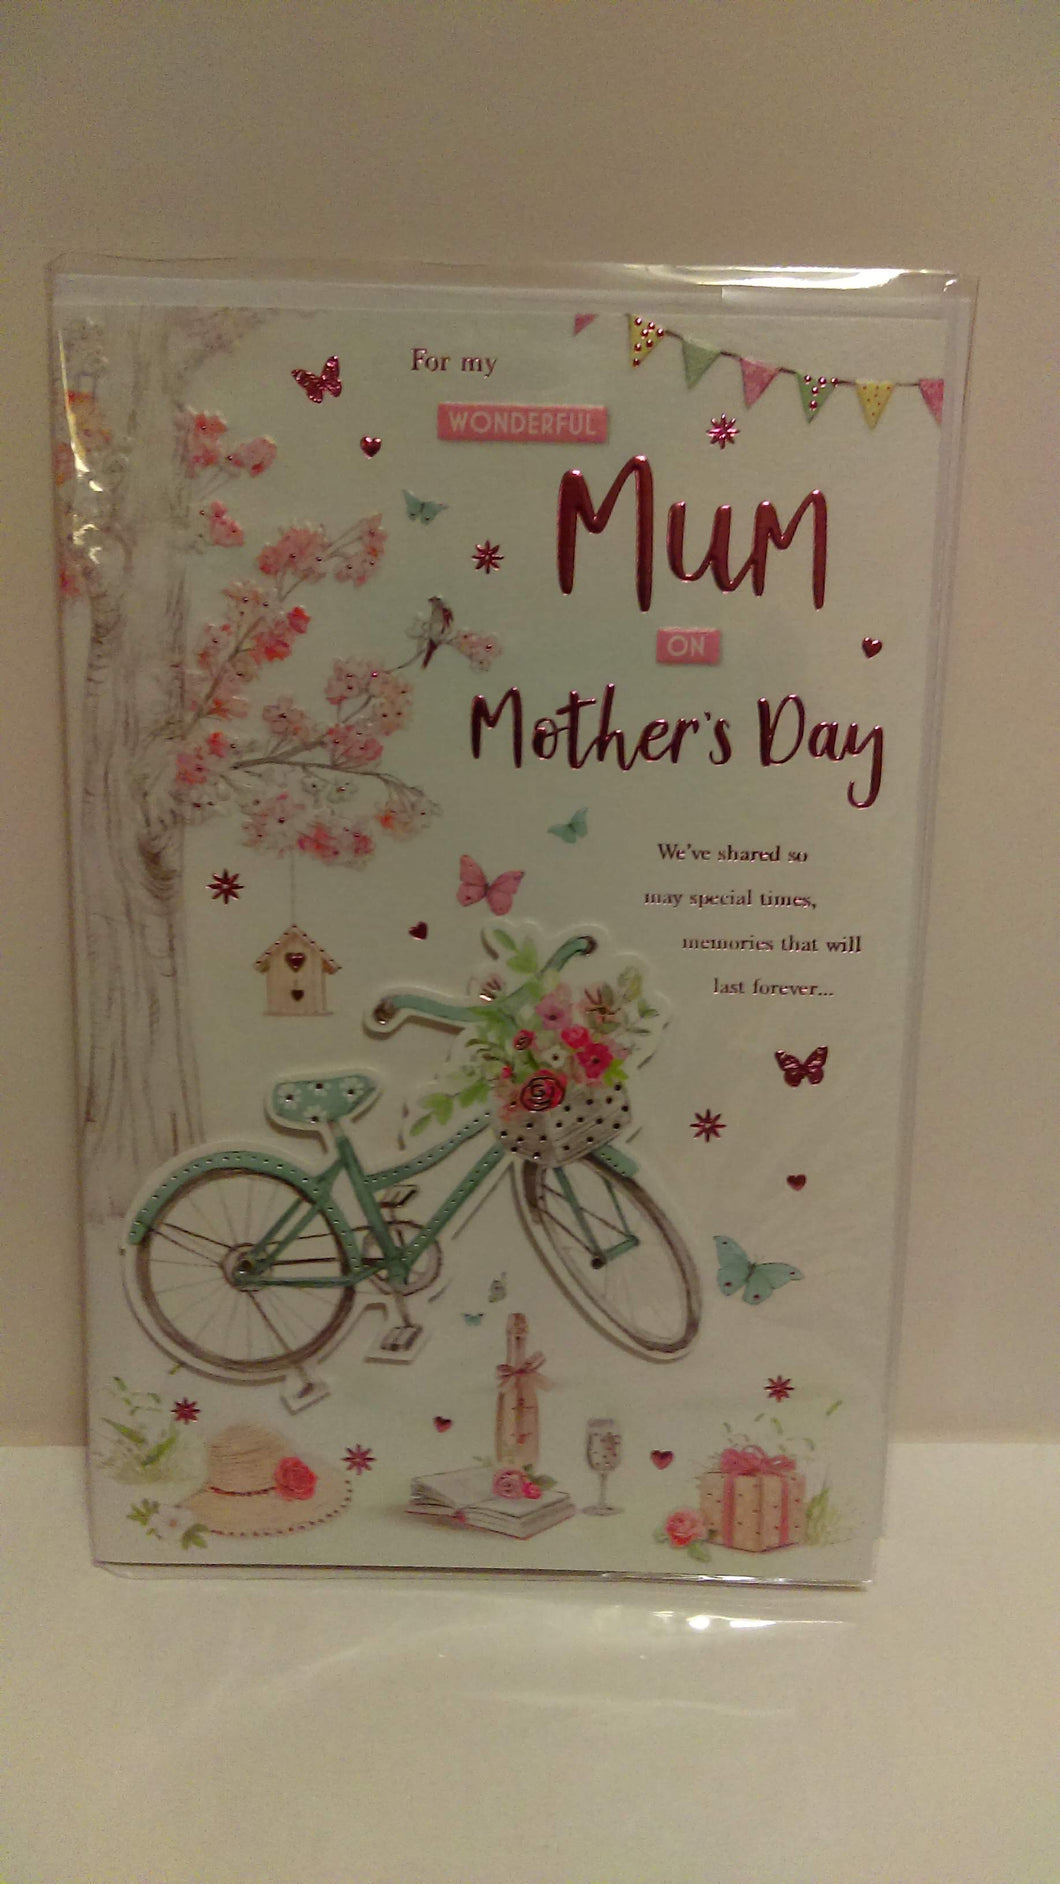 For my wonderful Mum on Mother's Day